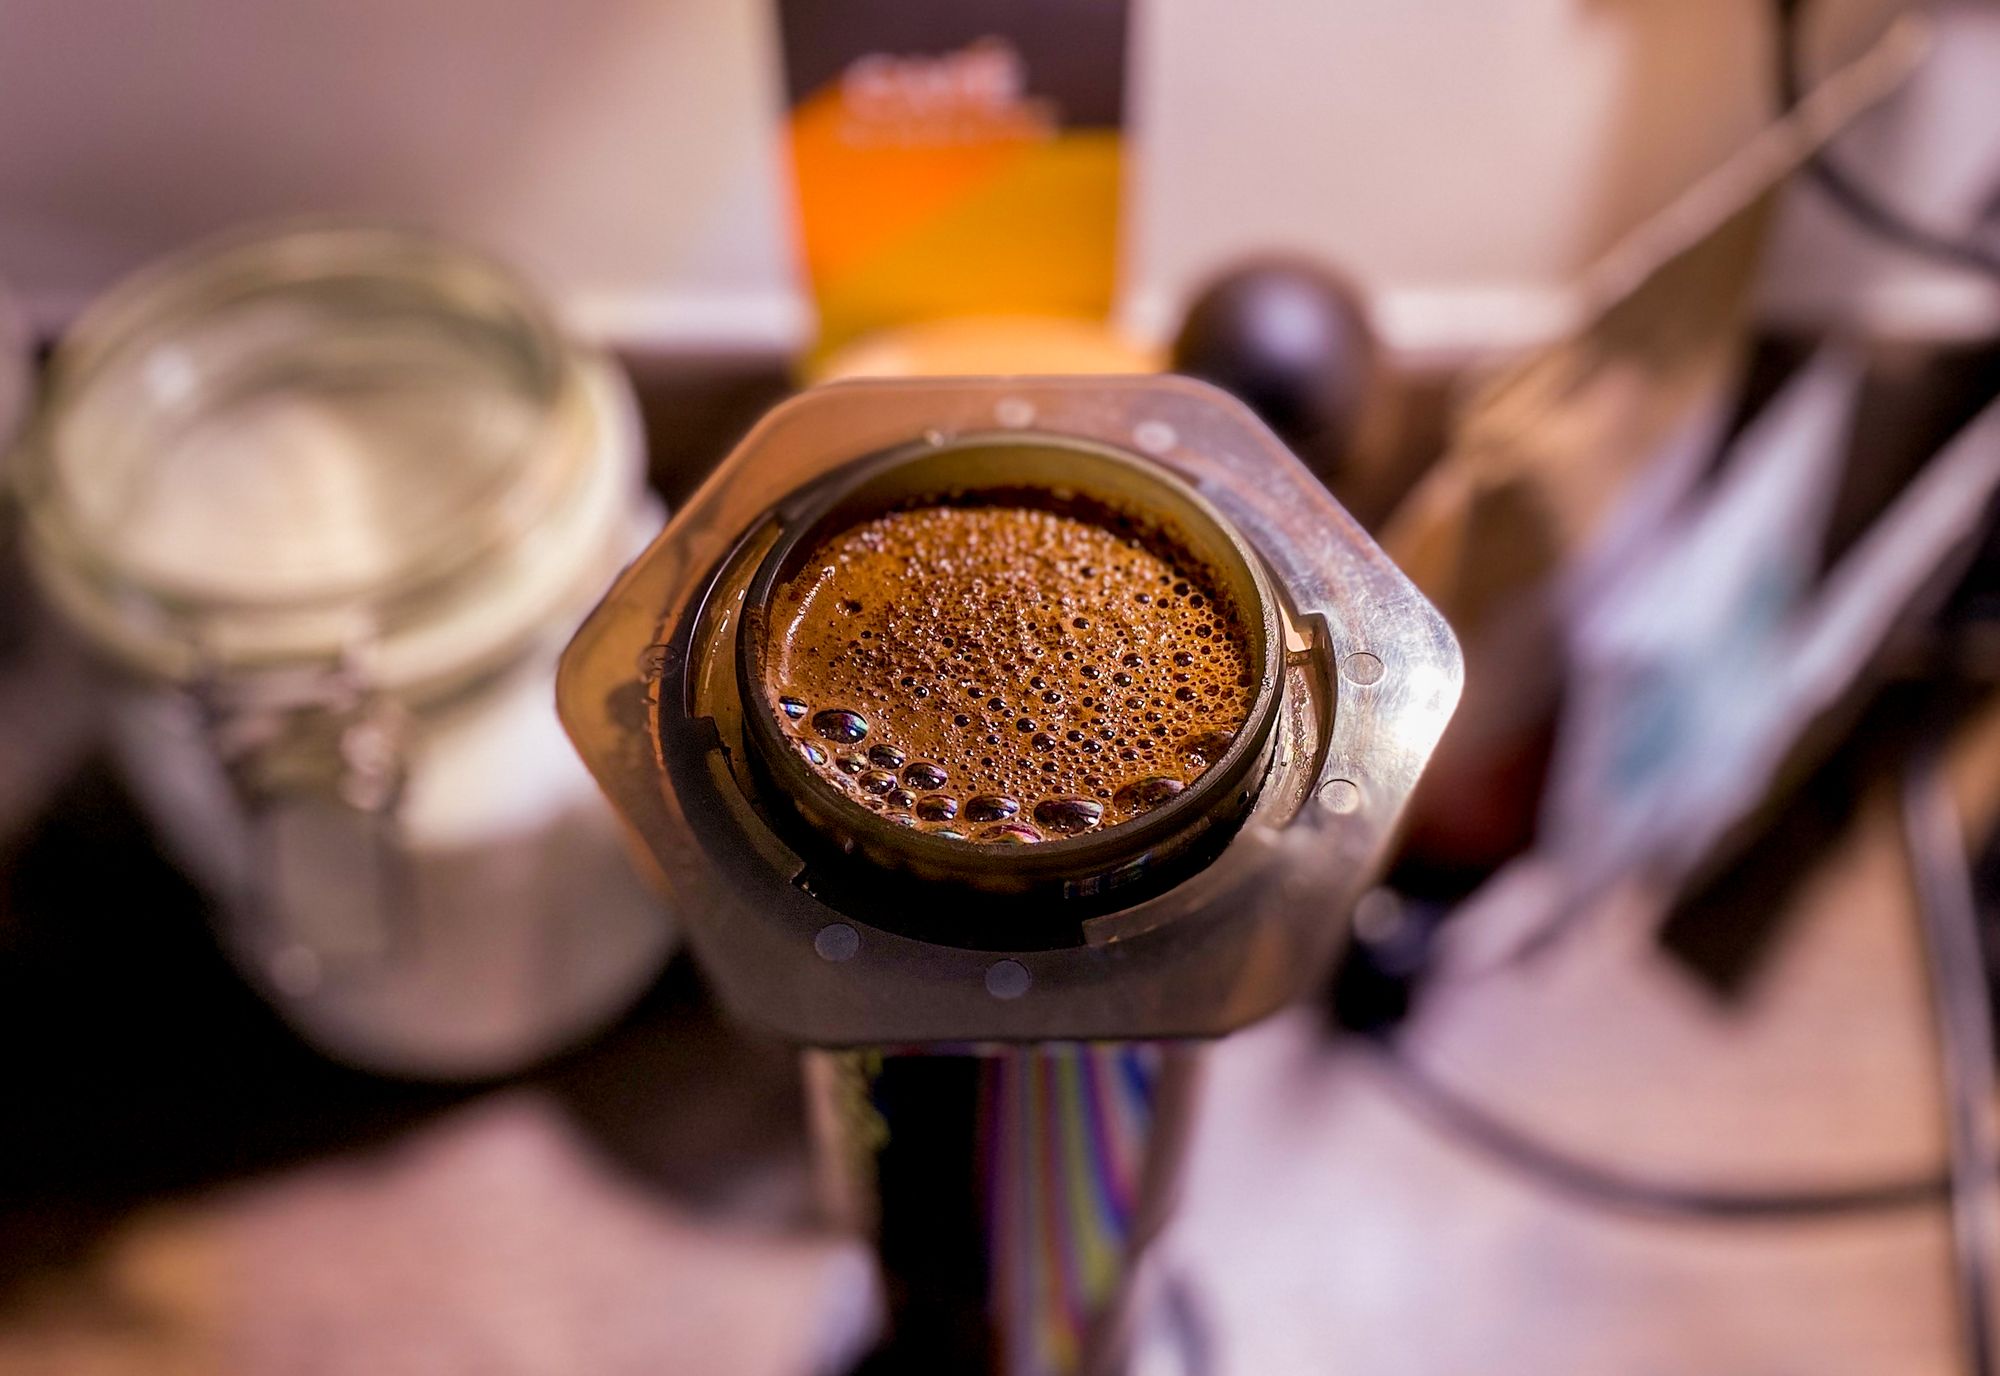 A close-up macro shot of coffee brewing in an Aeropress in the inverse method with a sugar jar and other kitchen items blurred in the background